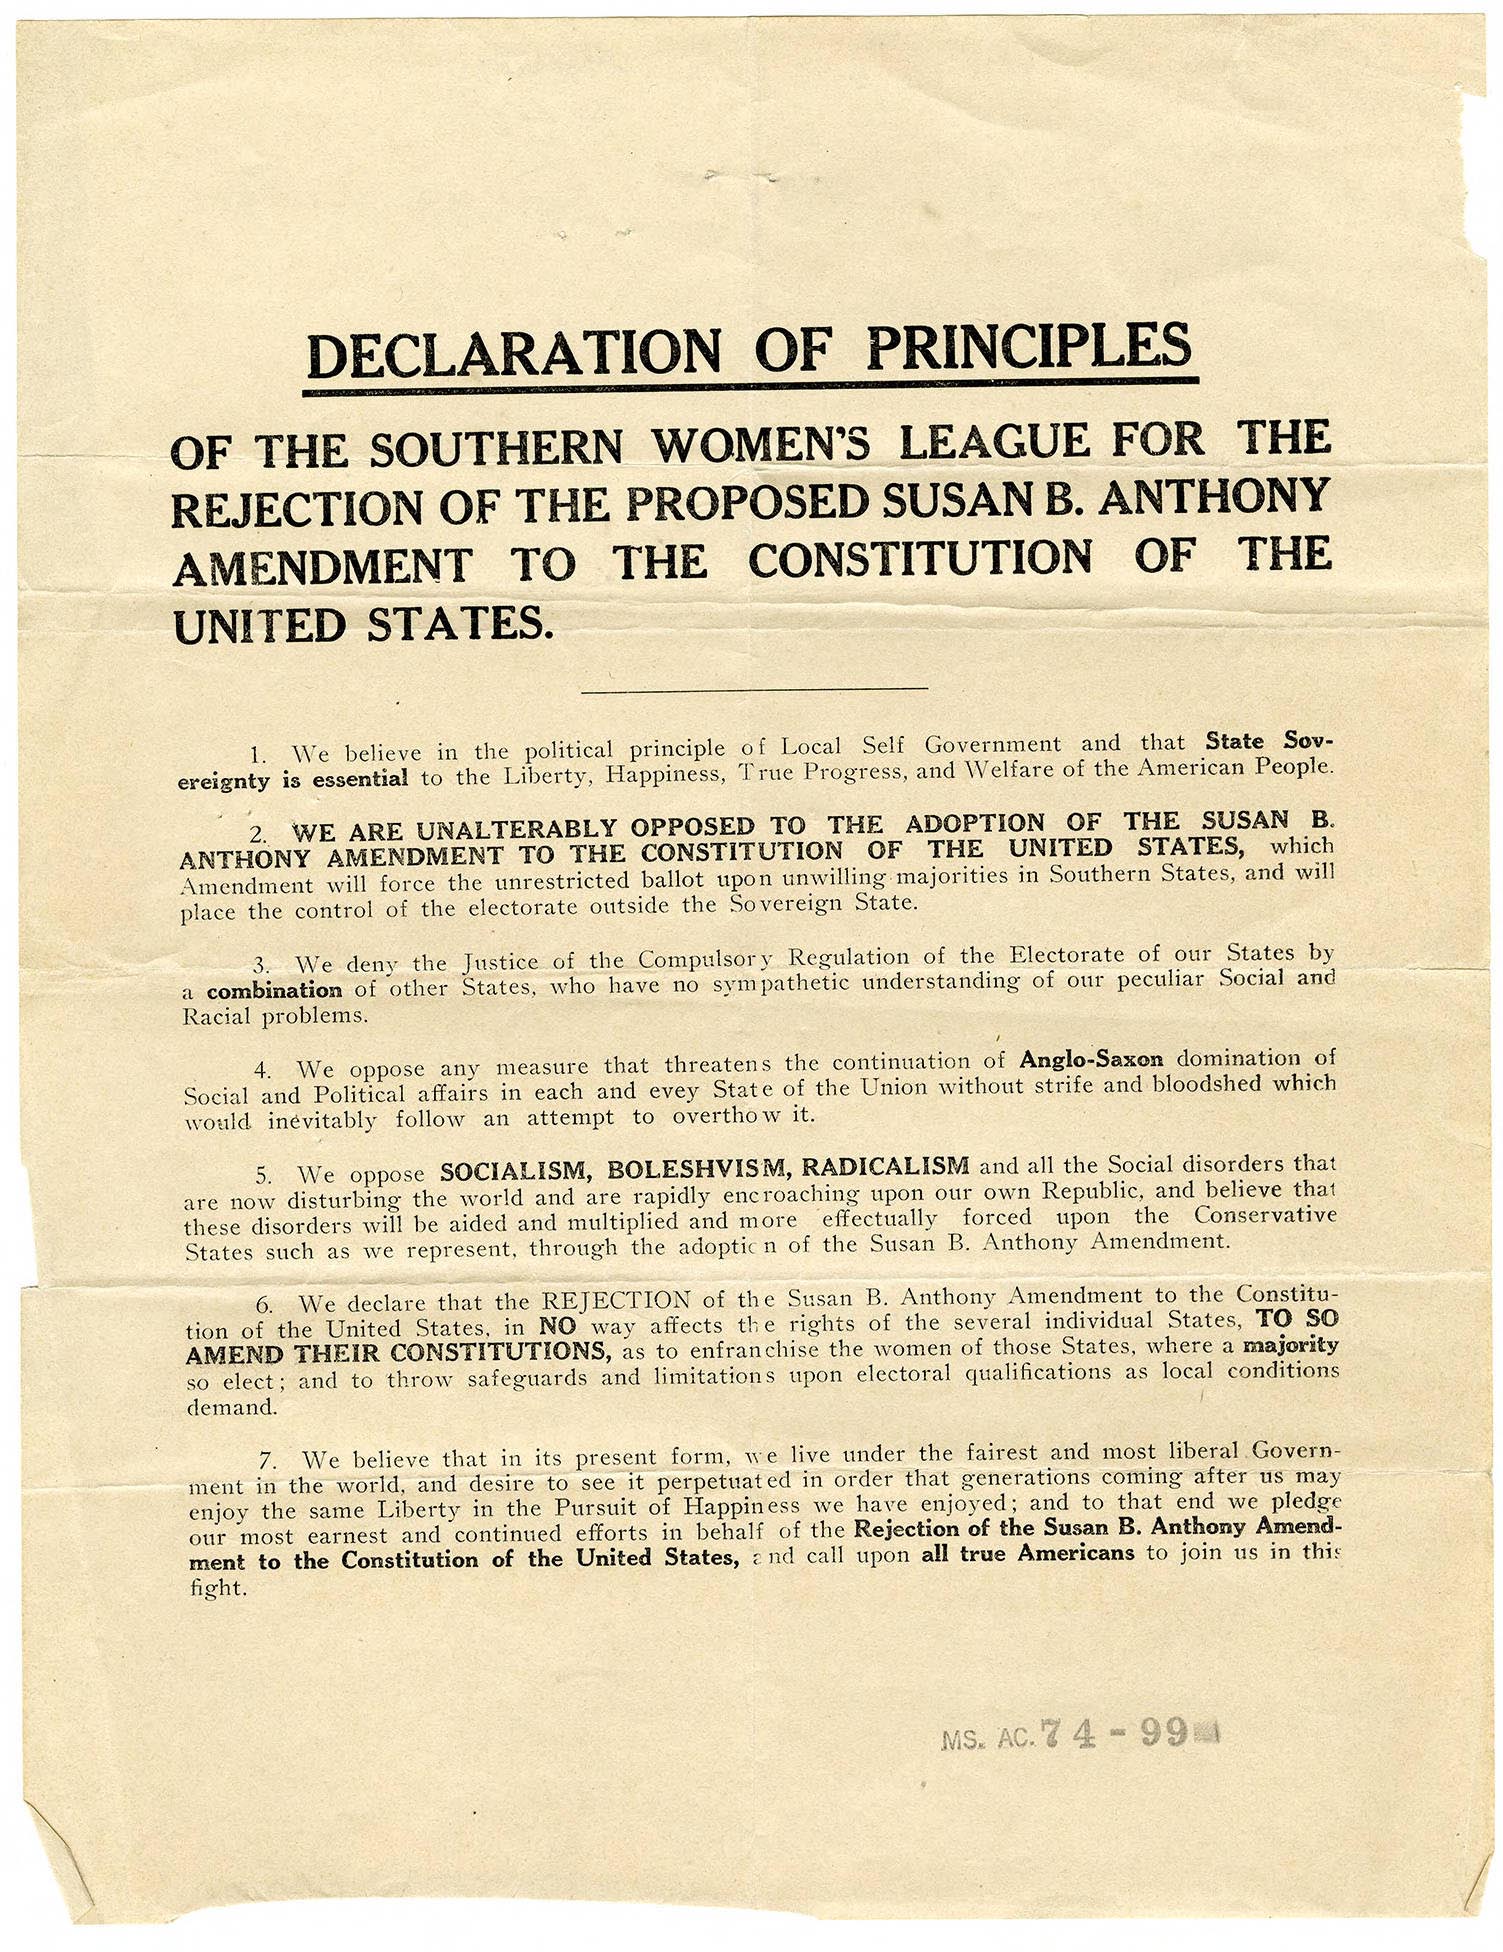 Anti-suffrage document issued by Southern Women’s League for the Rejection of the Susan B. Anthony Amendment